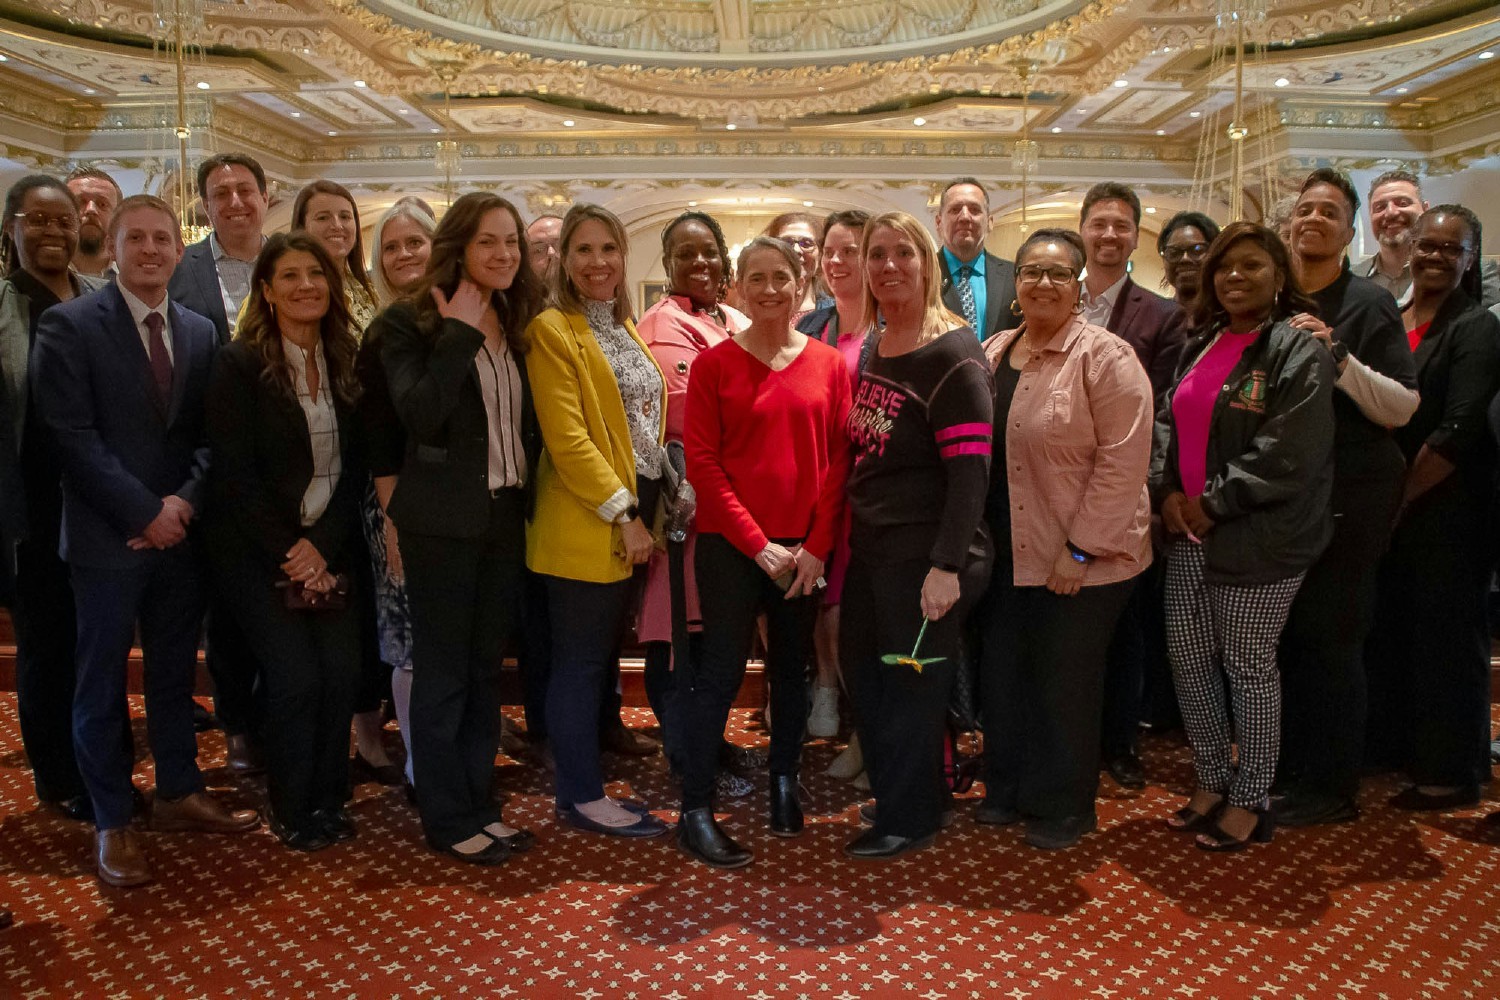 IPA staff and school leaders at the Illinois State Capitol advocating for children.